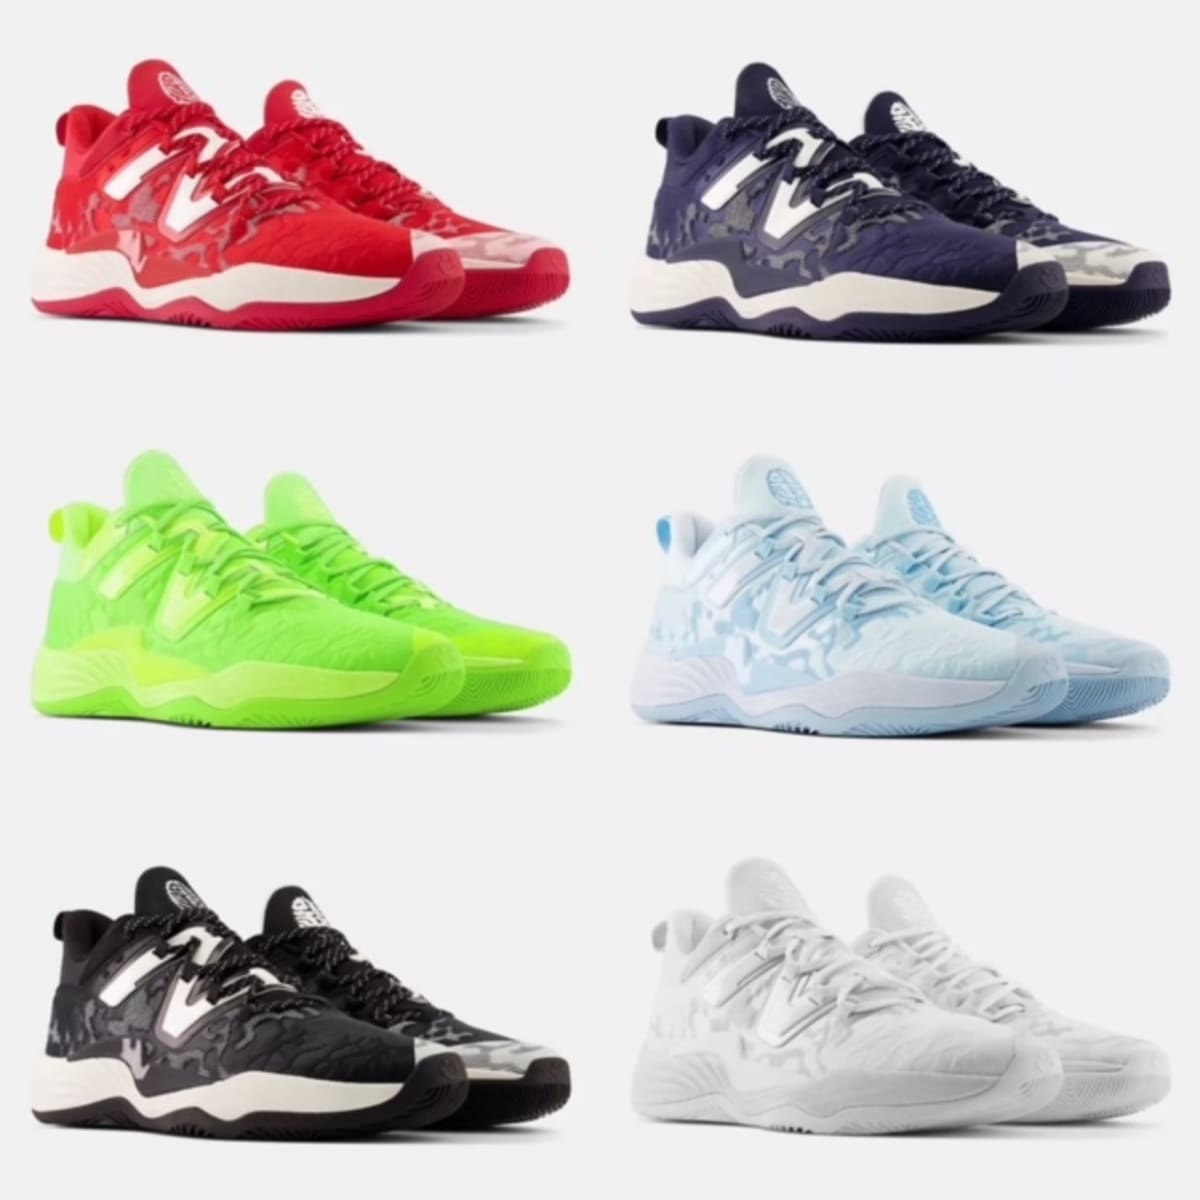 New Balance TWO WXY v3 Team Colorways Available Online - Sports